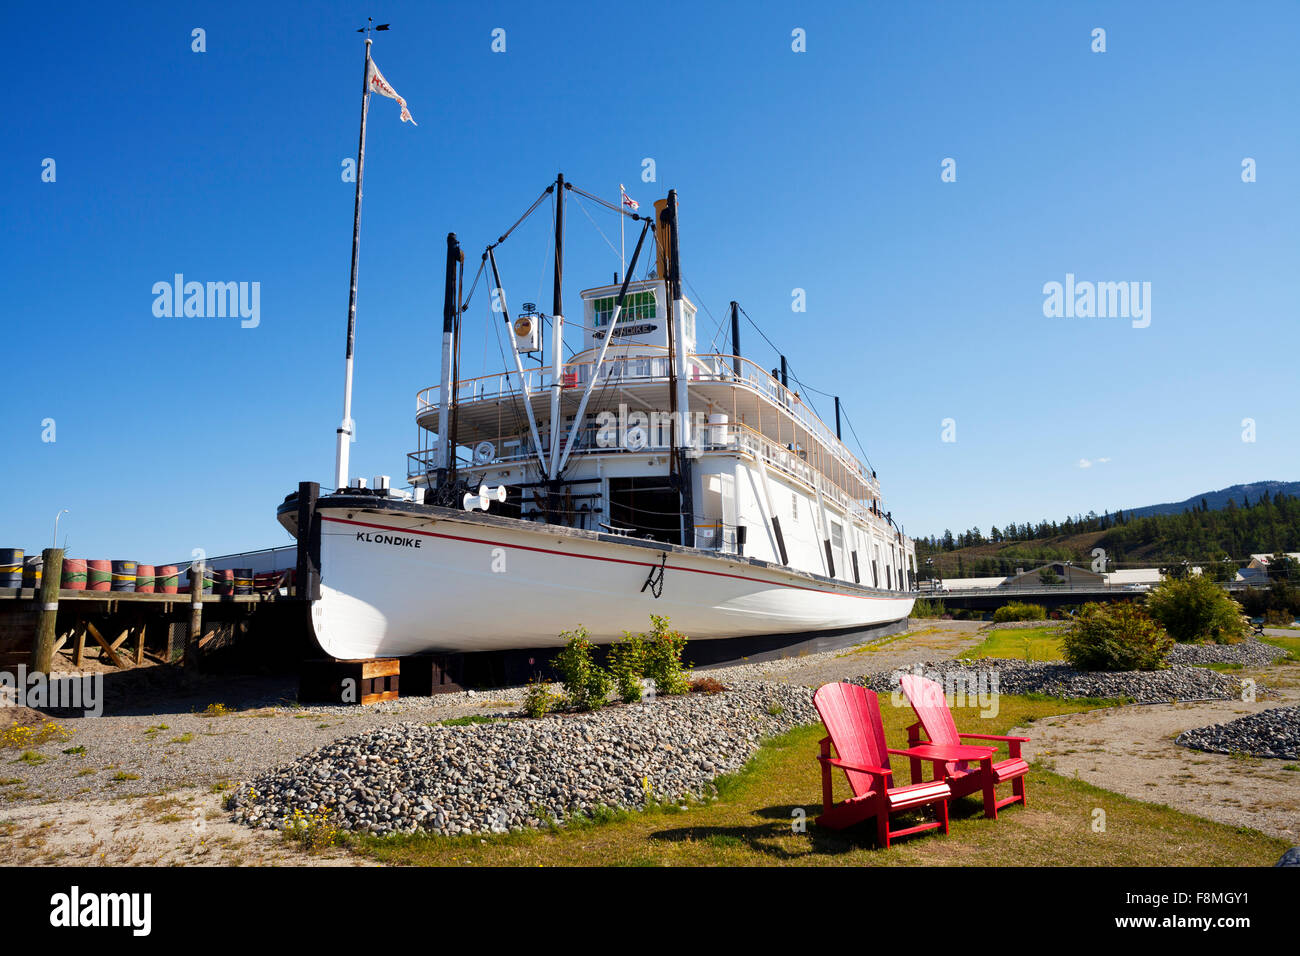 The SS Klondike National Historic Site Sternwheeler on the shores of ...